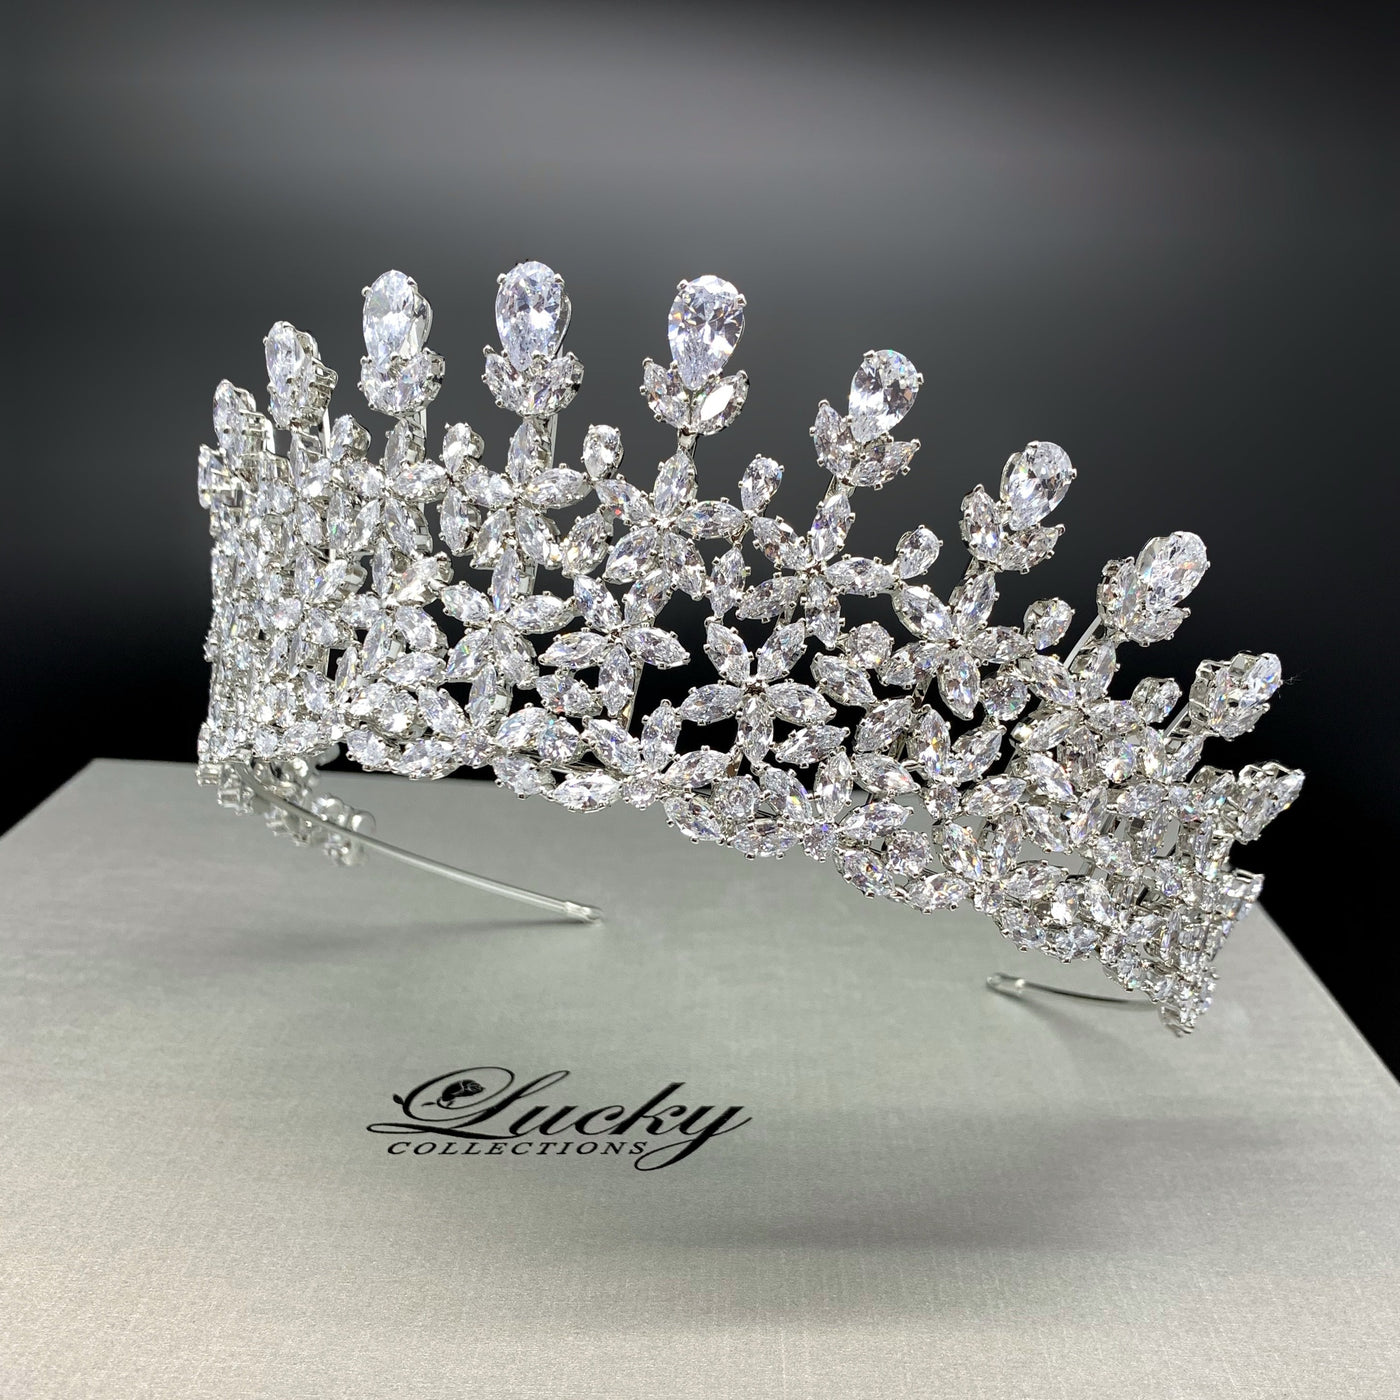 Tiara, Zirconia Gems fit for the Empress within you by Lucky Collections ™